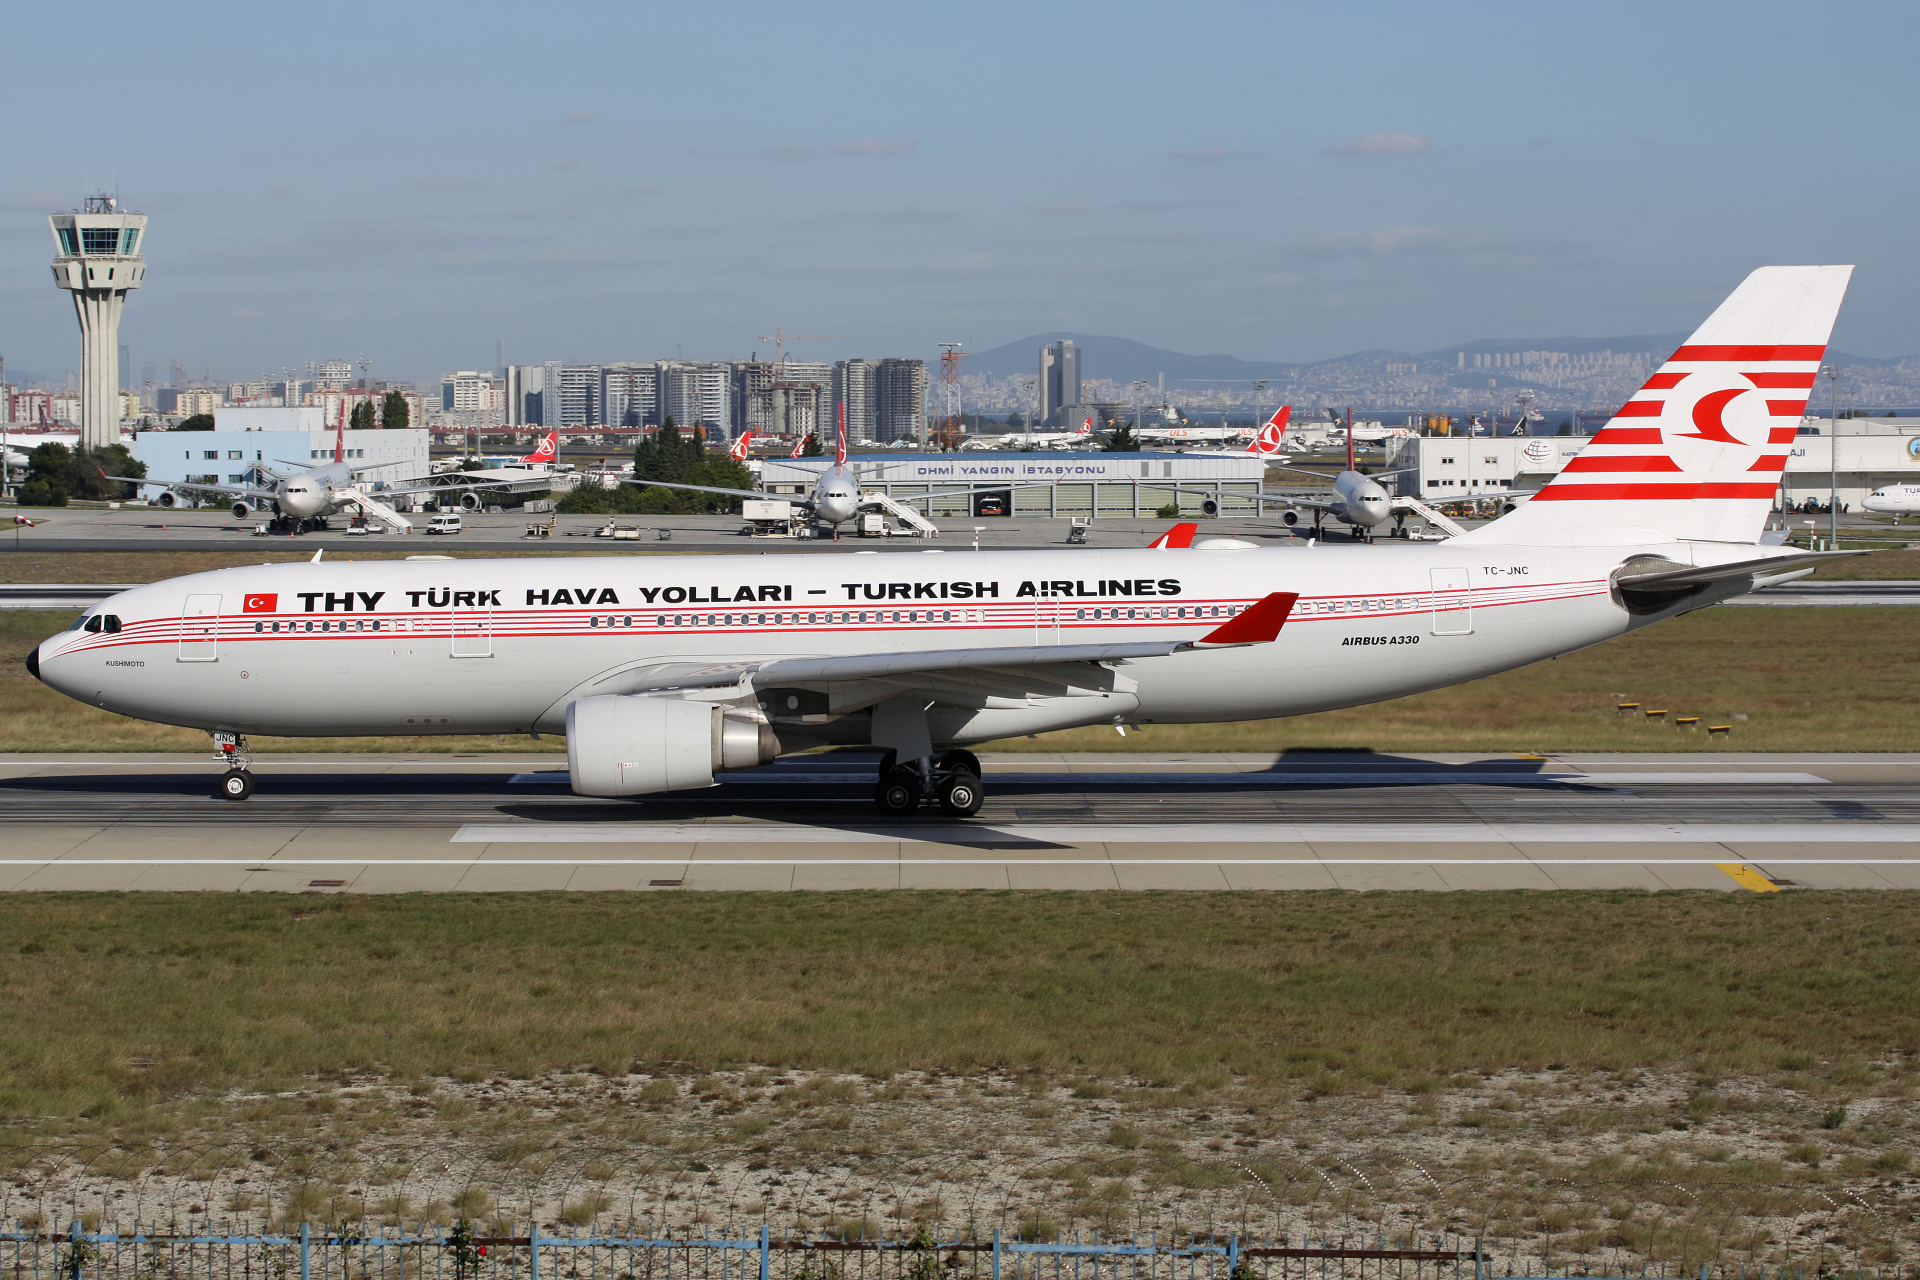 TC-JNC (retro livery) (Aircraft » Istanbul Atatürk Airport » Airbus A330-200 » THY Turkish Airlines)